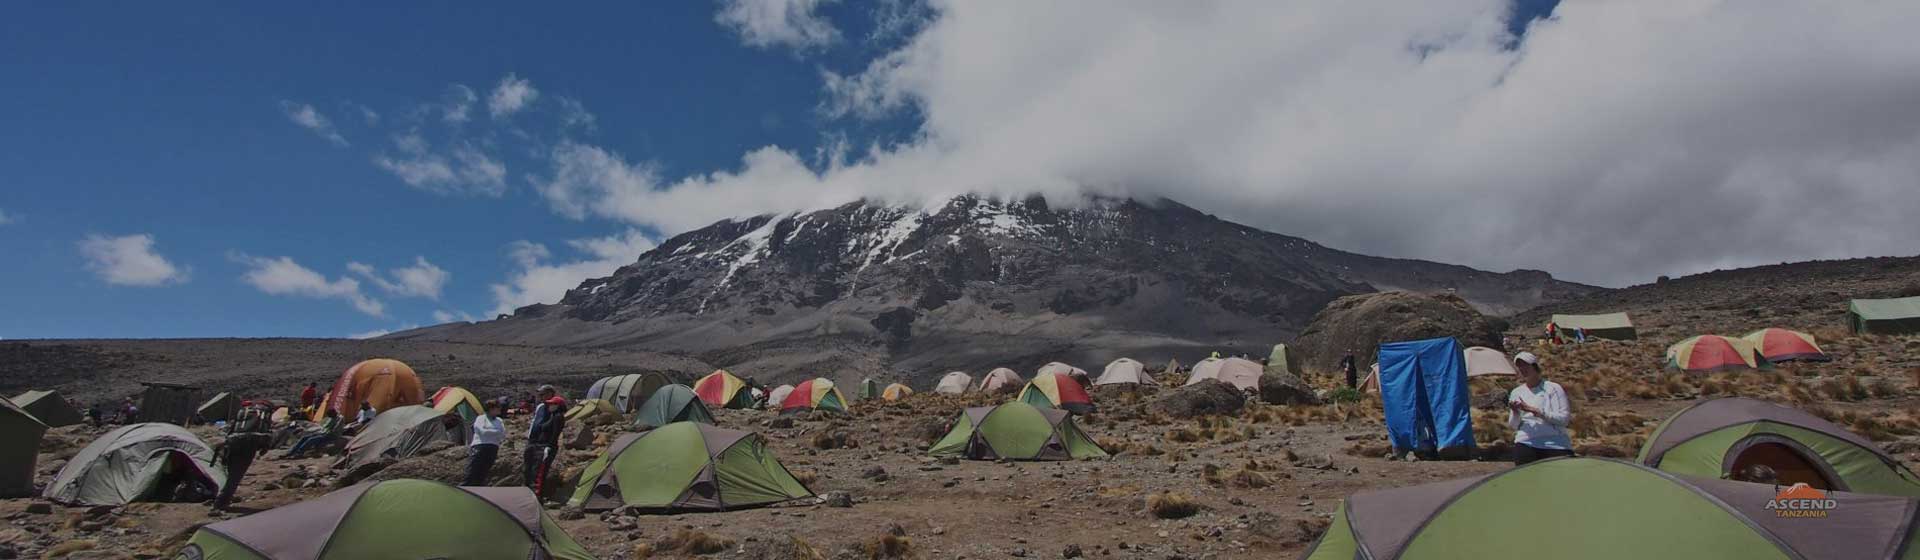 9 Days Lemosho Crater Camp Route